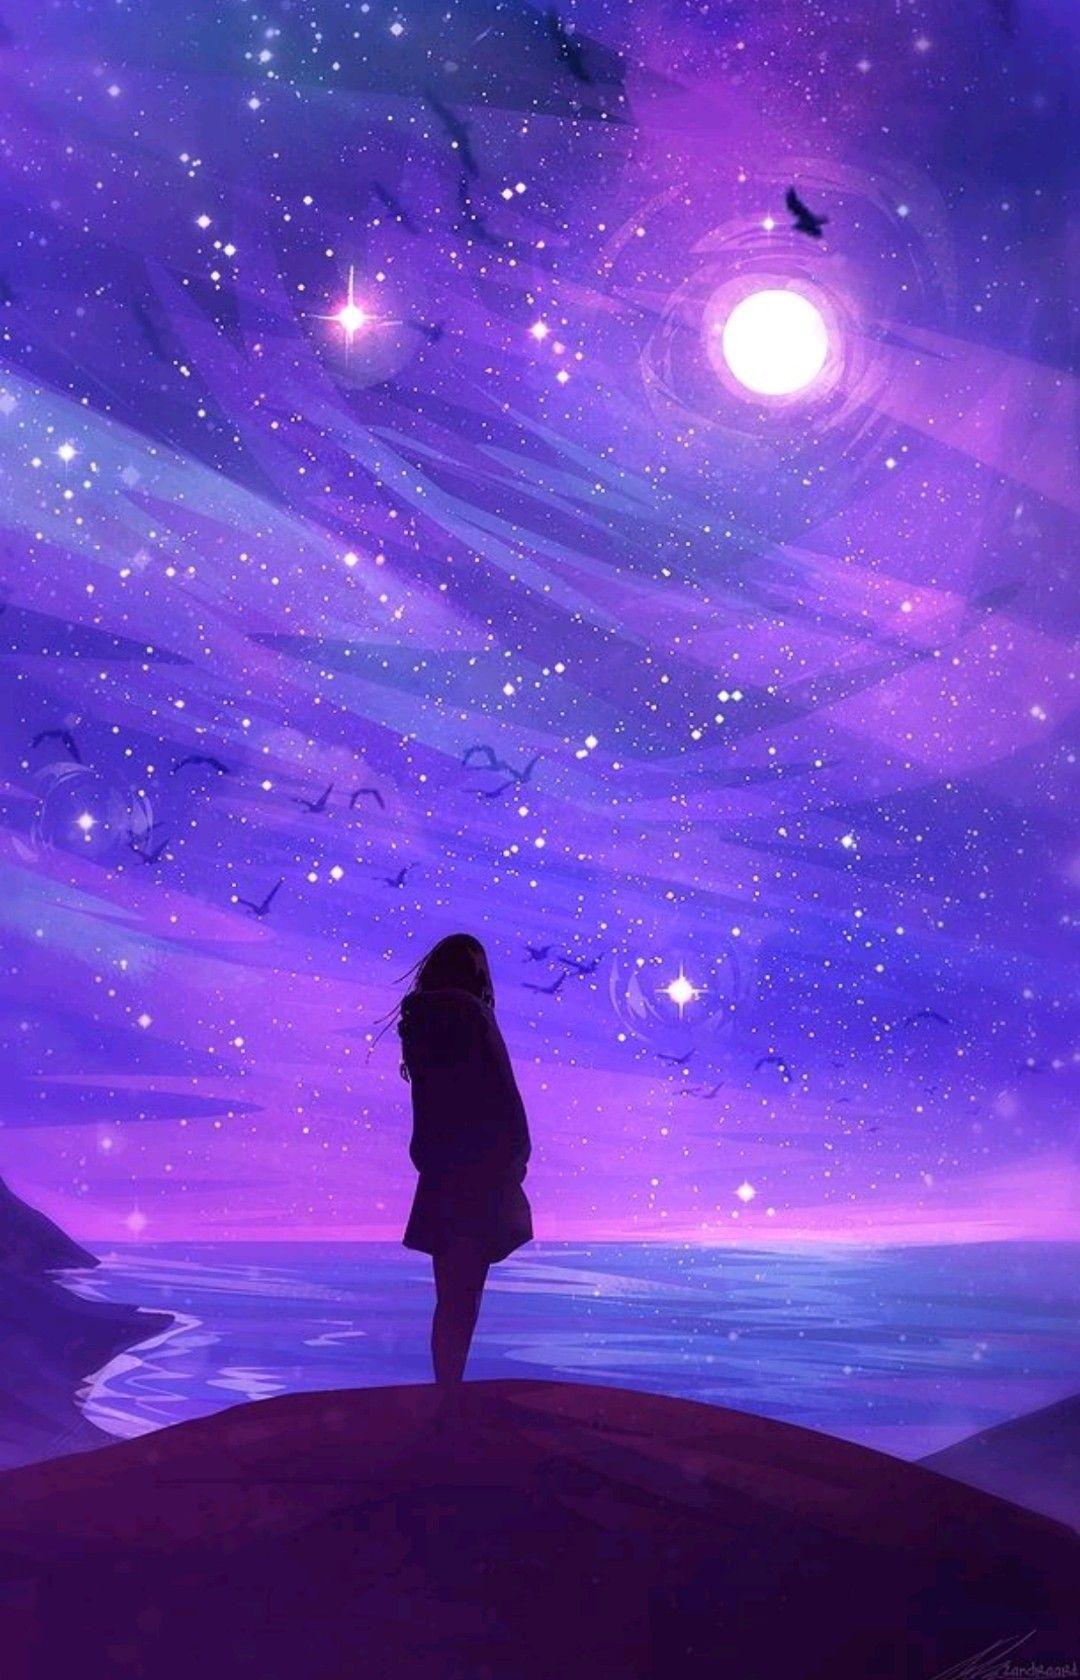 Girl Silhouette. Countless Stars Over the Shore, Shining brightly